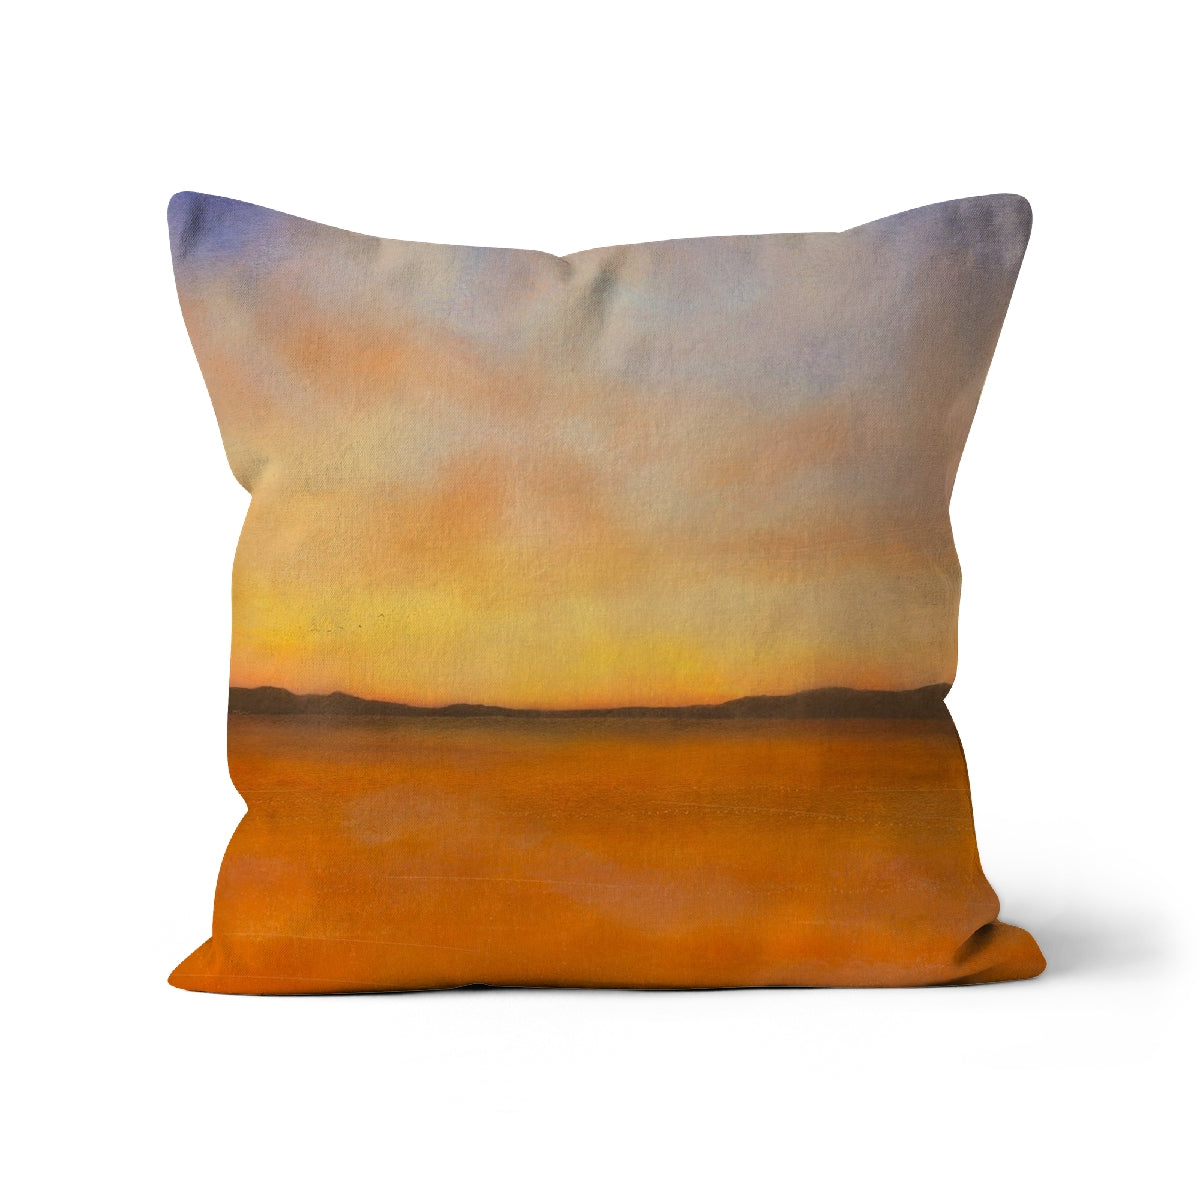 Islay Dawn Art Gifts Cushion-Cushions-Hebridean Islands Art Gallery-Linen-24"x24"-Paintings, Prints, Homeware, Art Gifts From Scotland By Scottish Artist Kevin Hunter